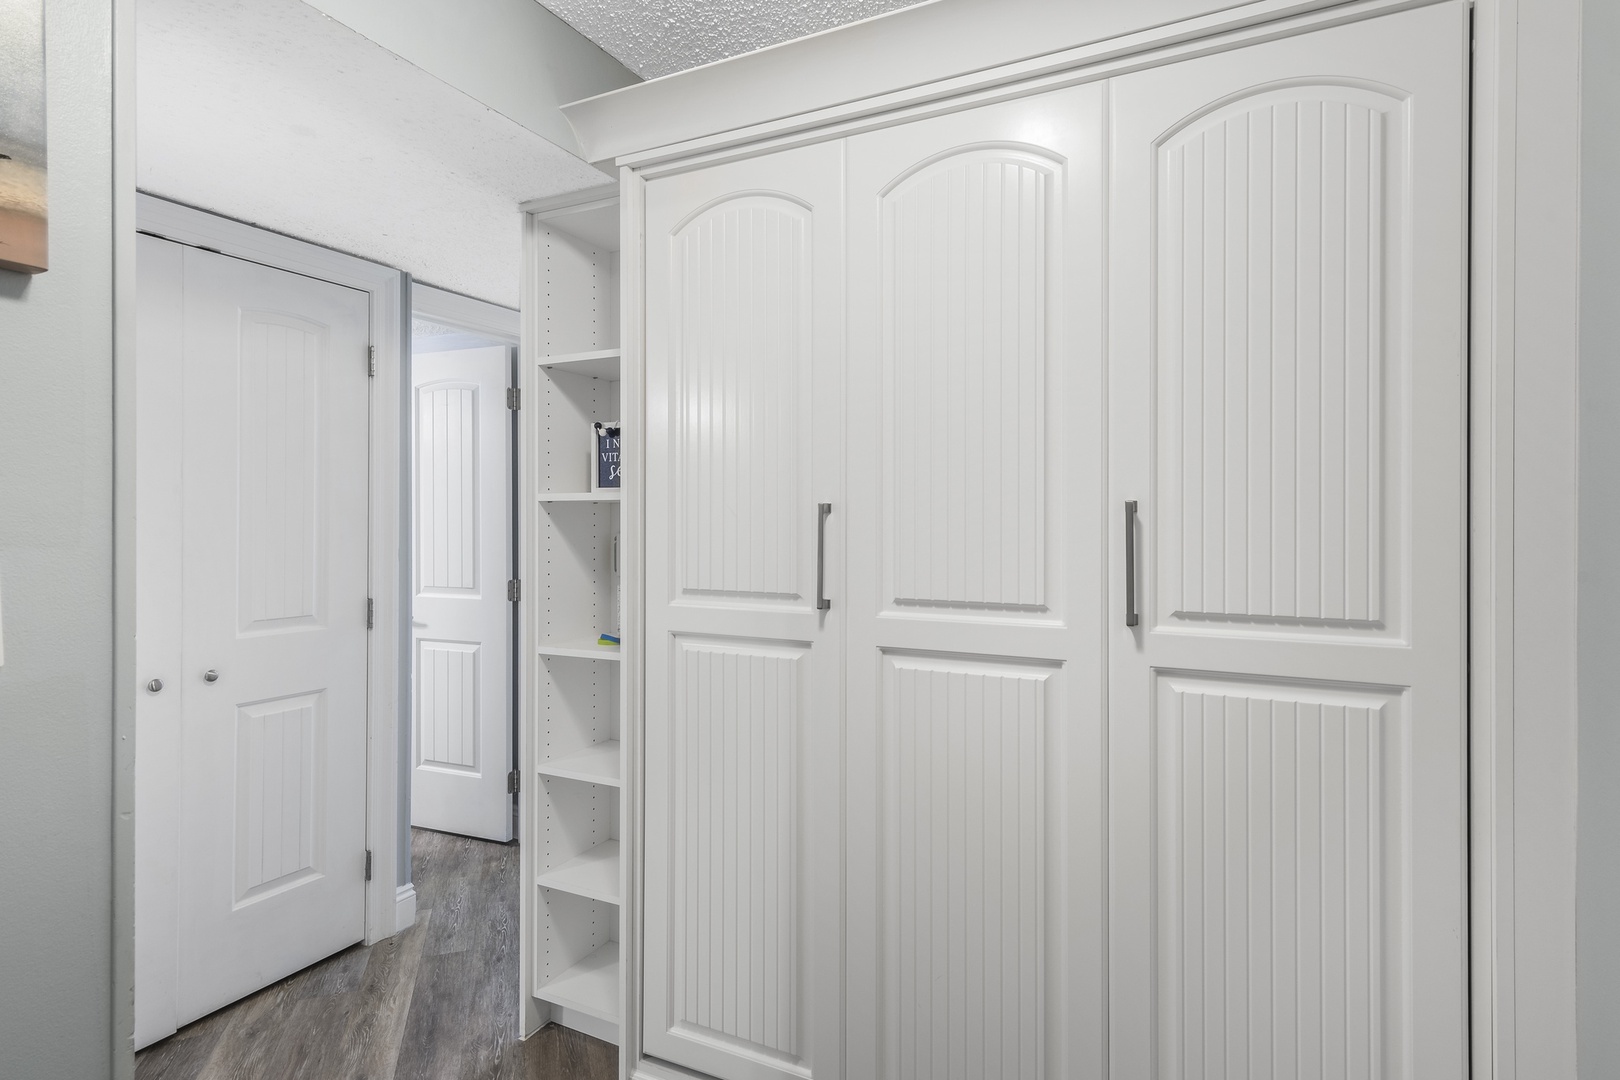 Murphy Bed in Entry Way